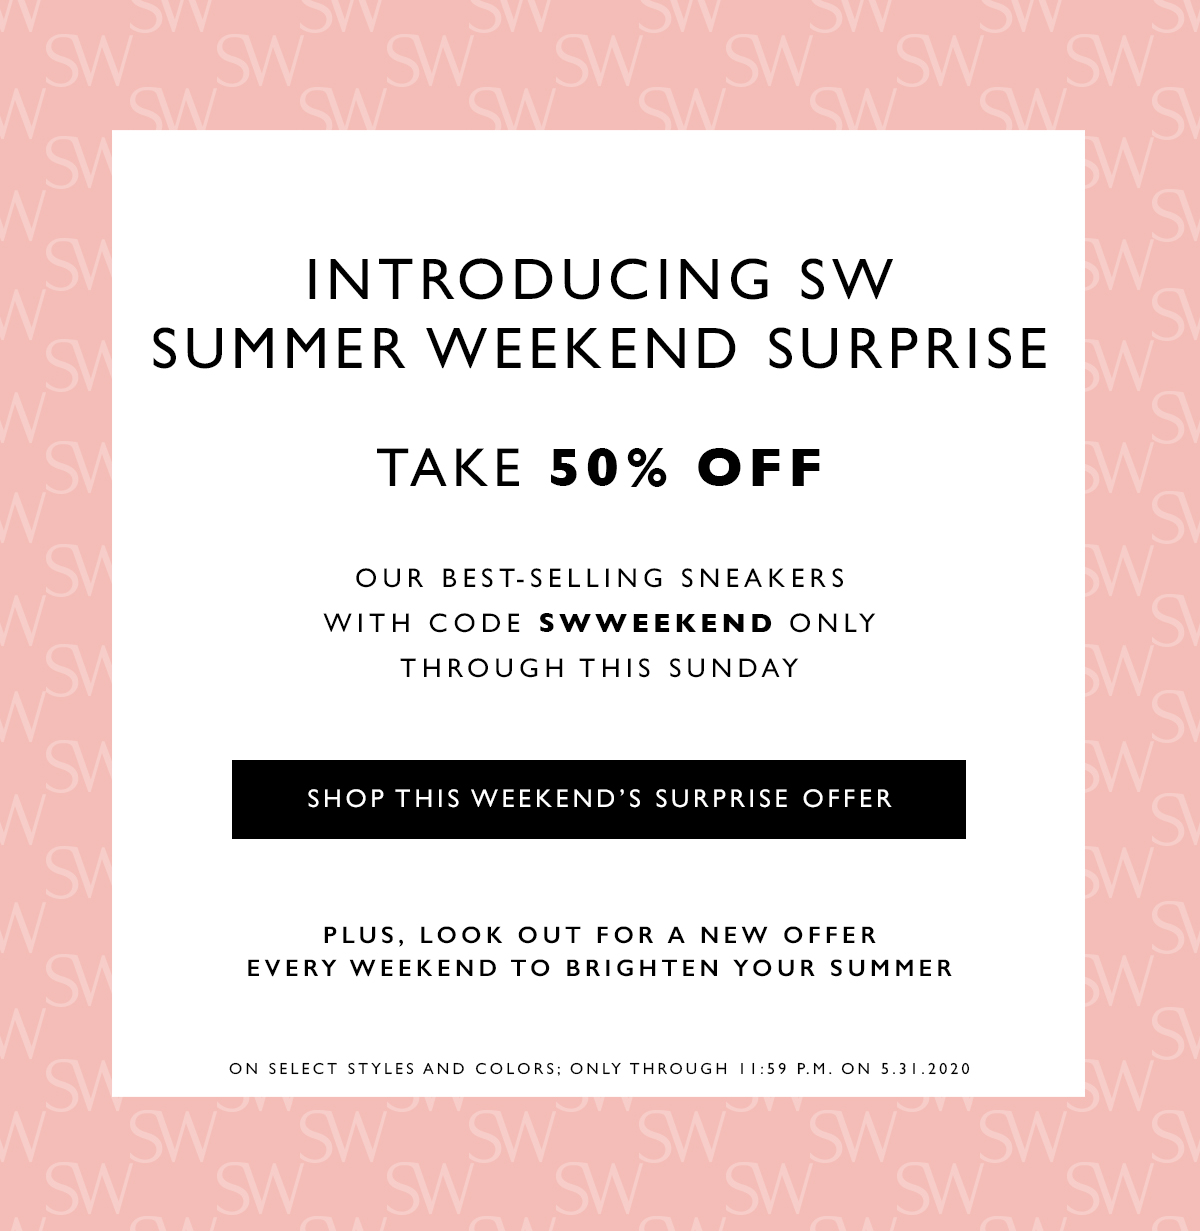 Introducing SW Summer Weekend Surprise. Take 50% off. Our best-selling sneakers. With code SWWEEKEND only through this Sunday. SHOP THIS WEEKEND’S SURPRISE OFFER